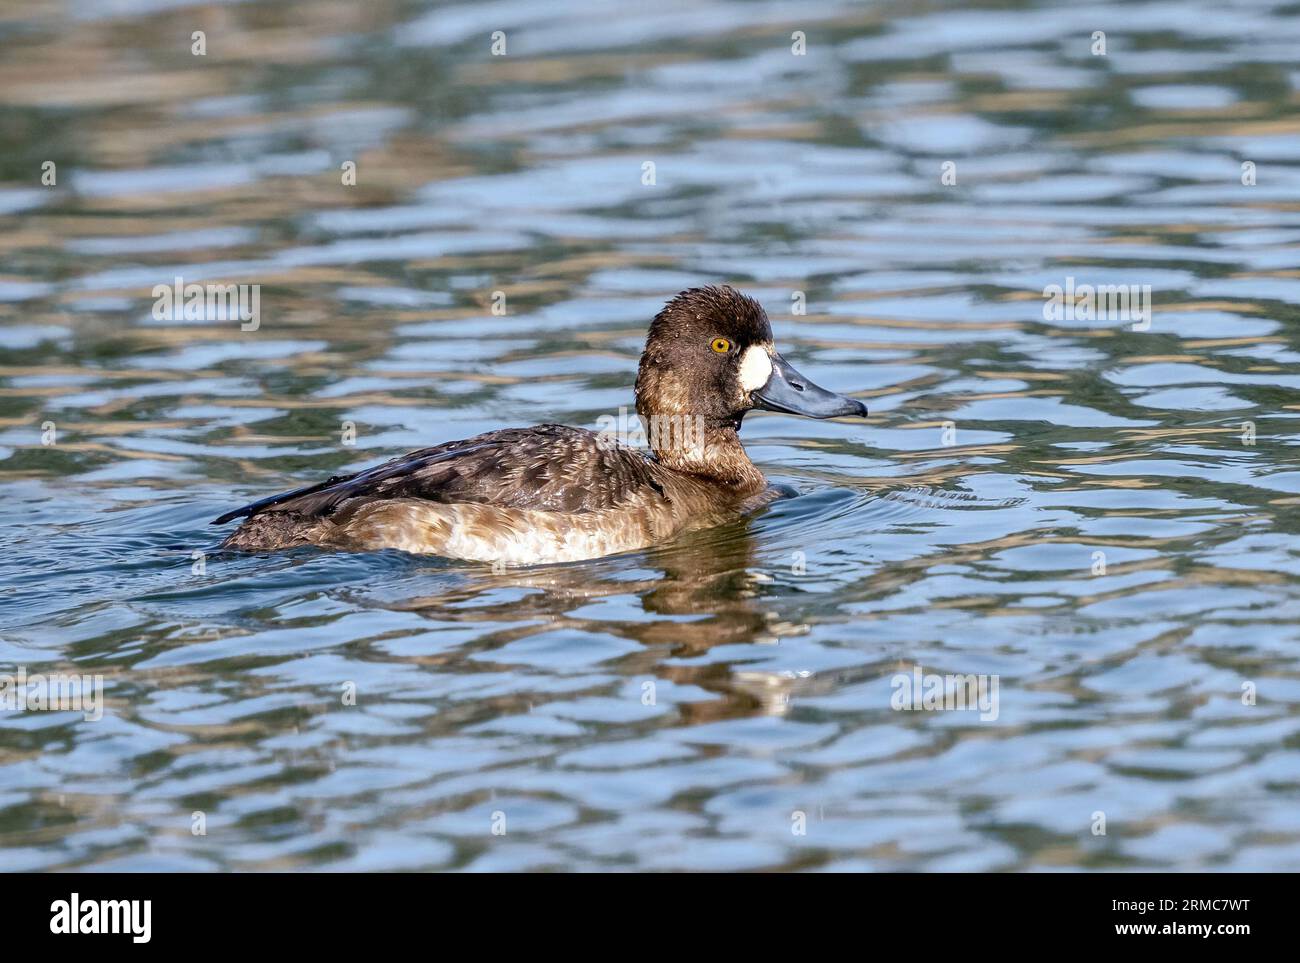 A Lesser Scaup female duck viewed at close range swimming in a Lake in the Spring Season. Stock Photo